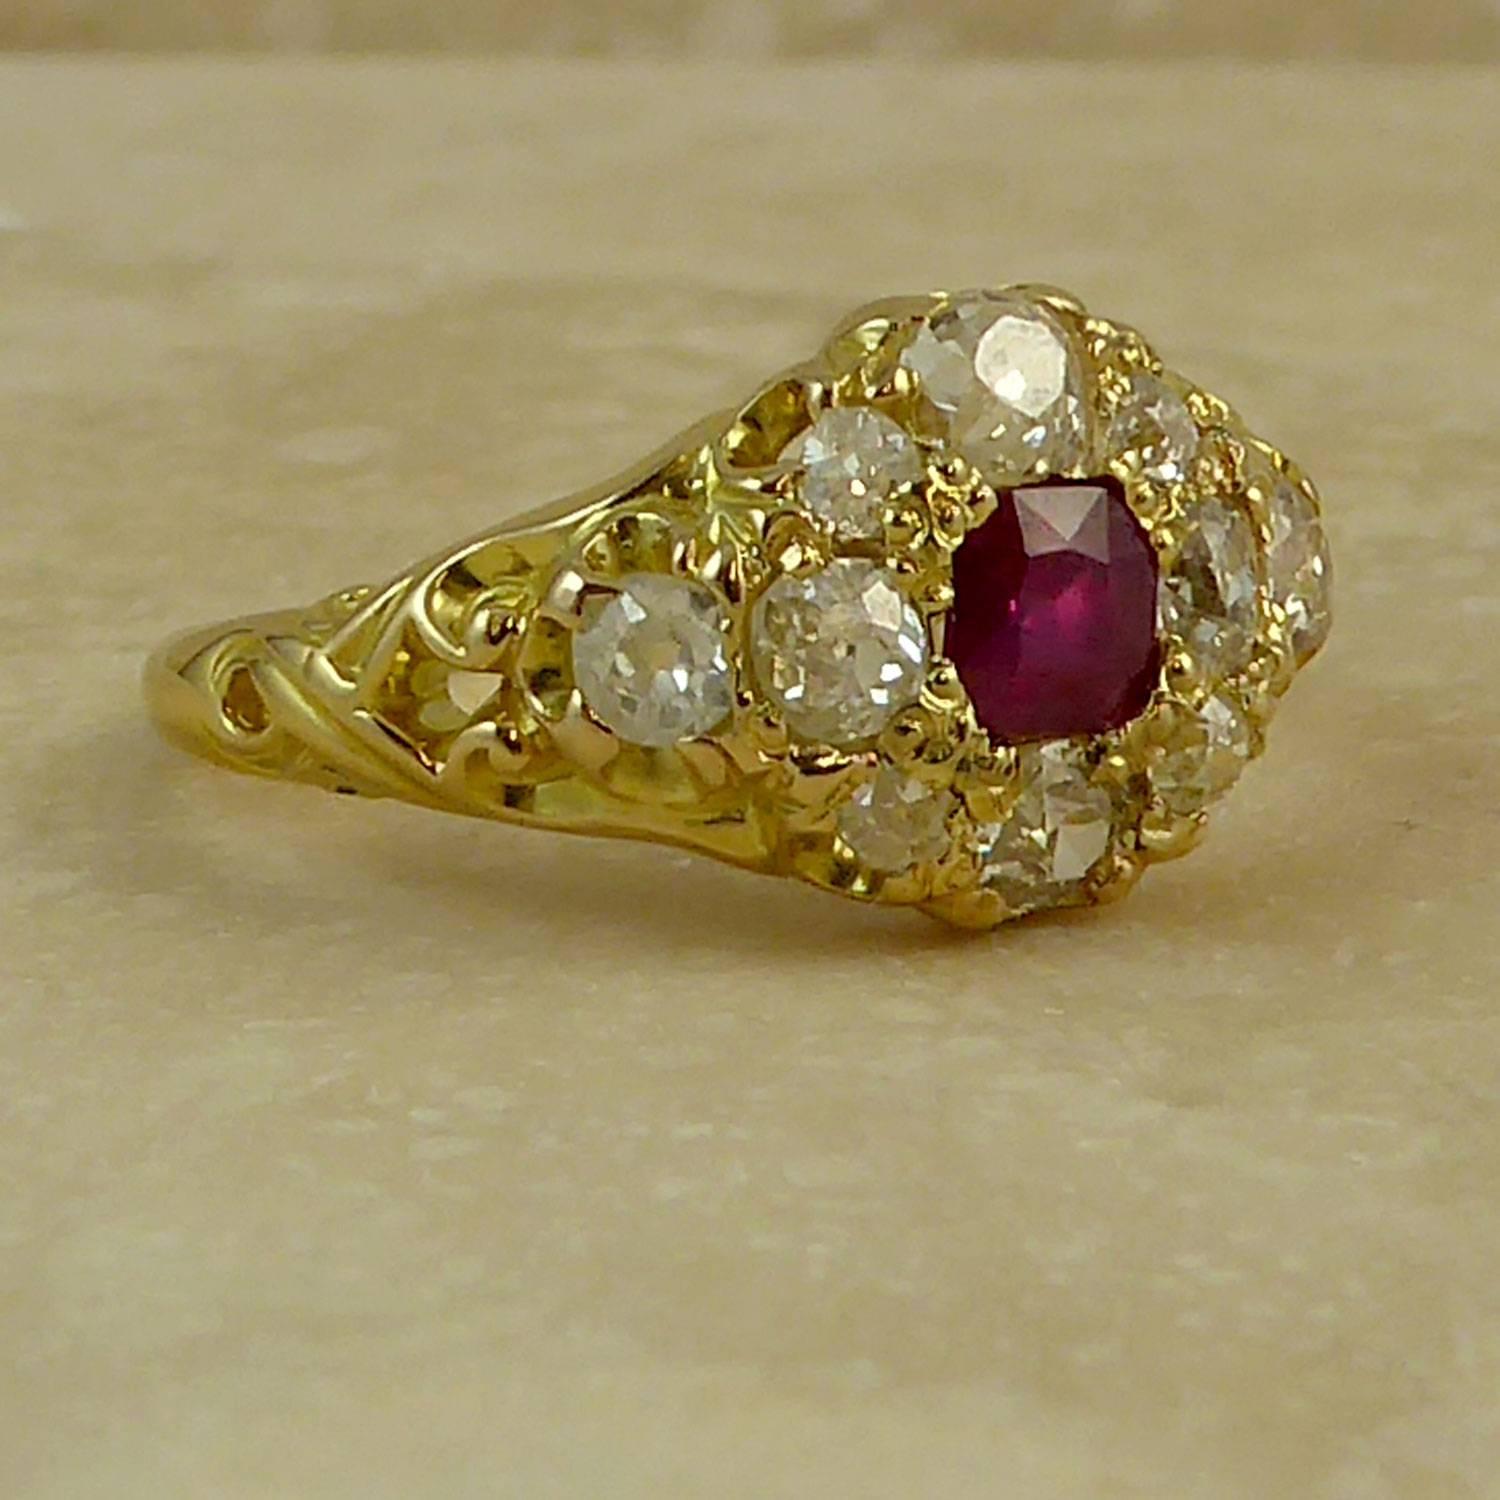 An Edwardian ruby and diamond cluster ring set to the centre with an octagonal cushion, cushion shaped, Swiss-cut ruby of slightly purple mid-red colouor, measuring approx. 4.4mm x 4.2mm x 2.06mm and with a weight of approx. 0.36ct.  The ruby is in